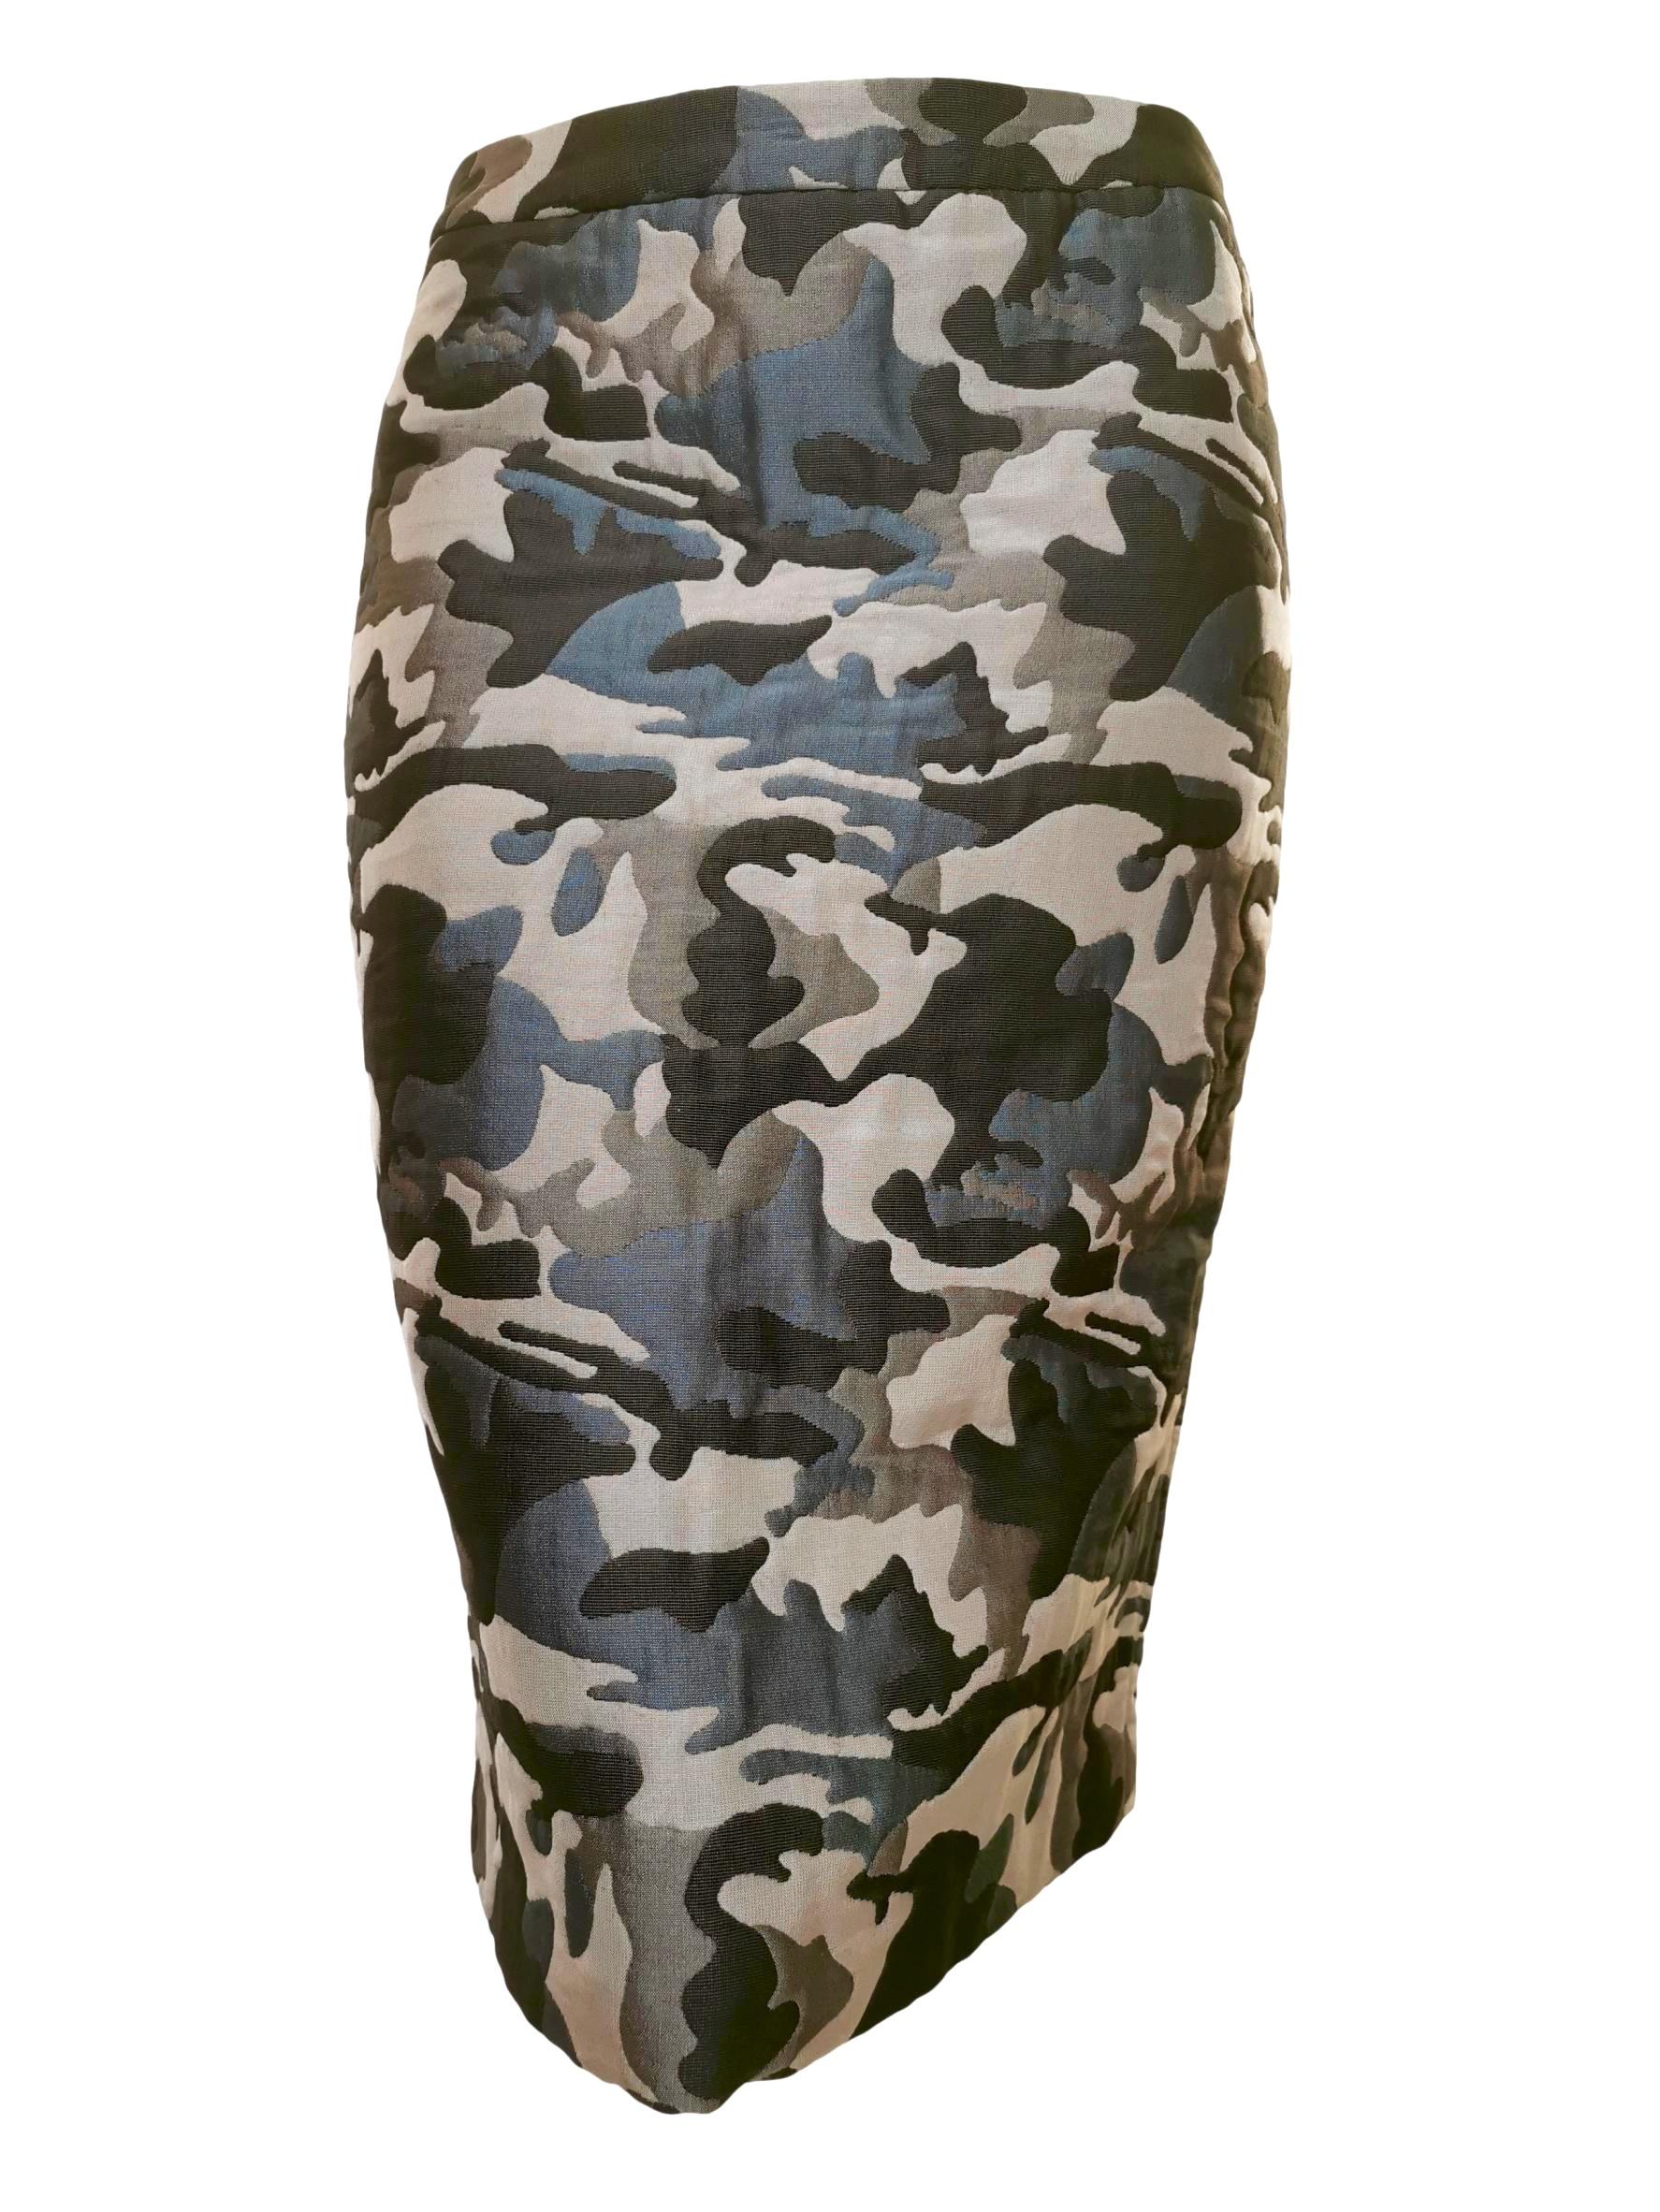 Alexander McQueen Vintage 1990's Quilted Camouflage Fitted Skirt  For Sale 7